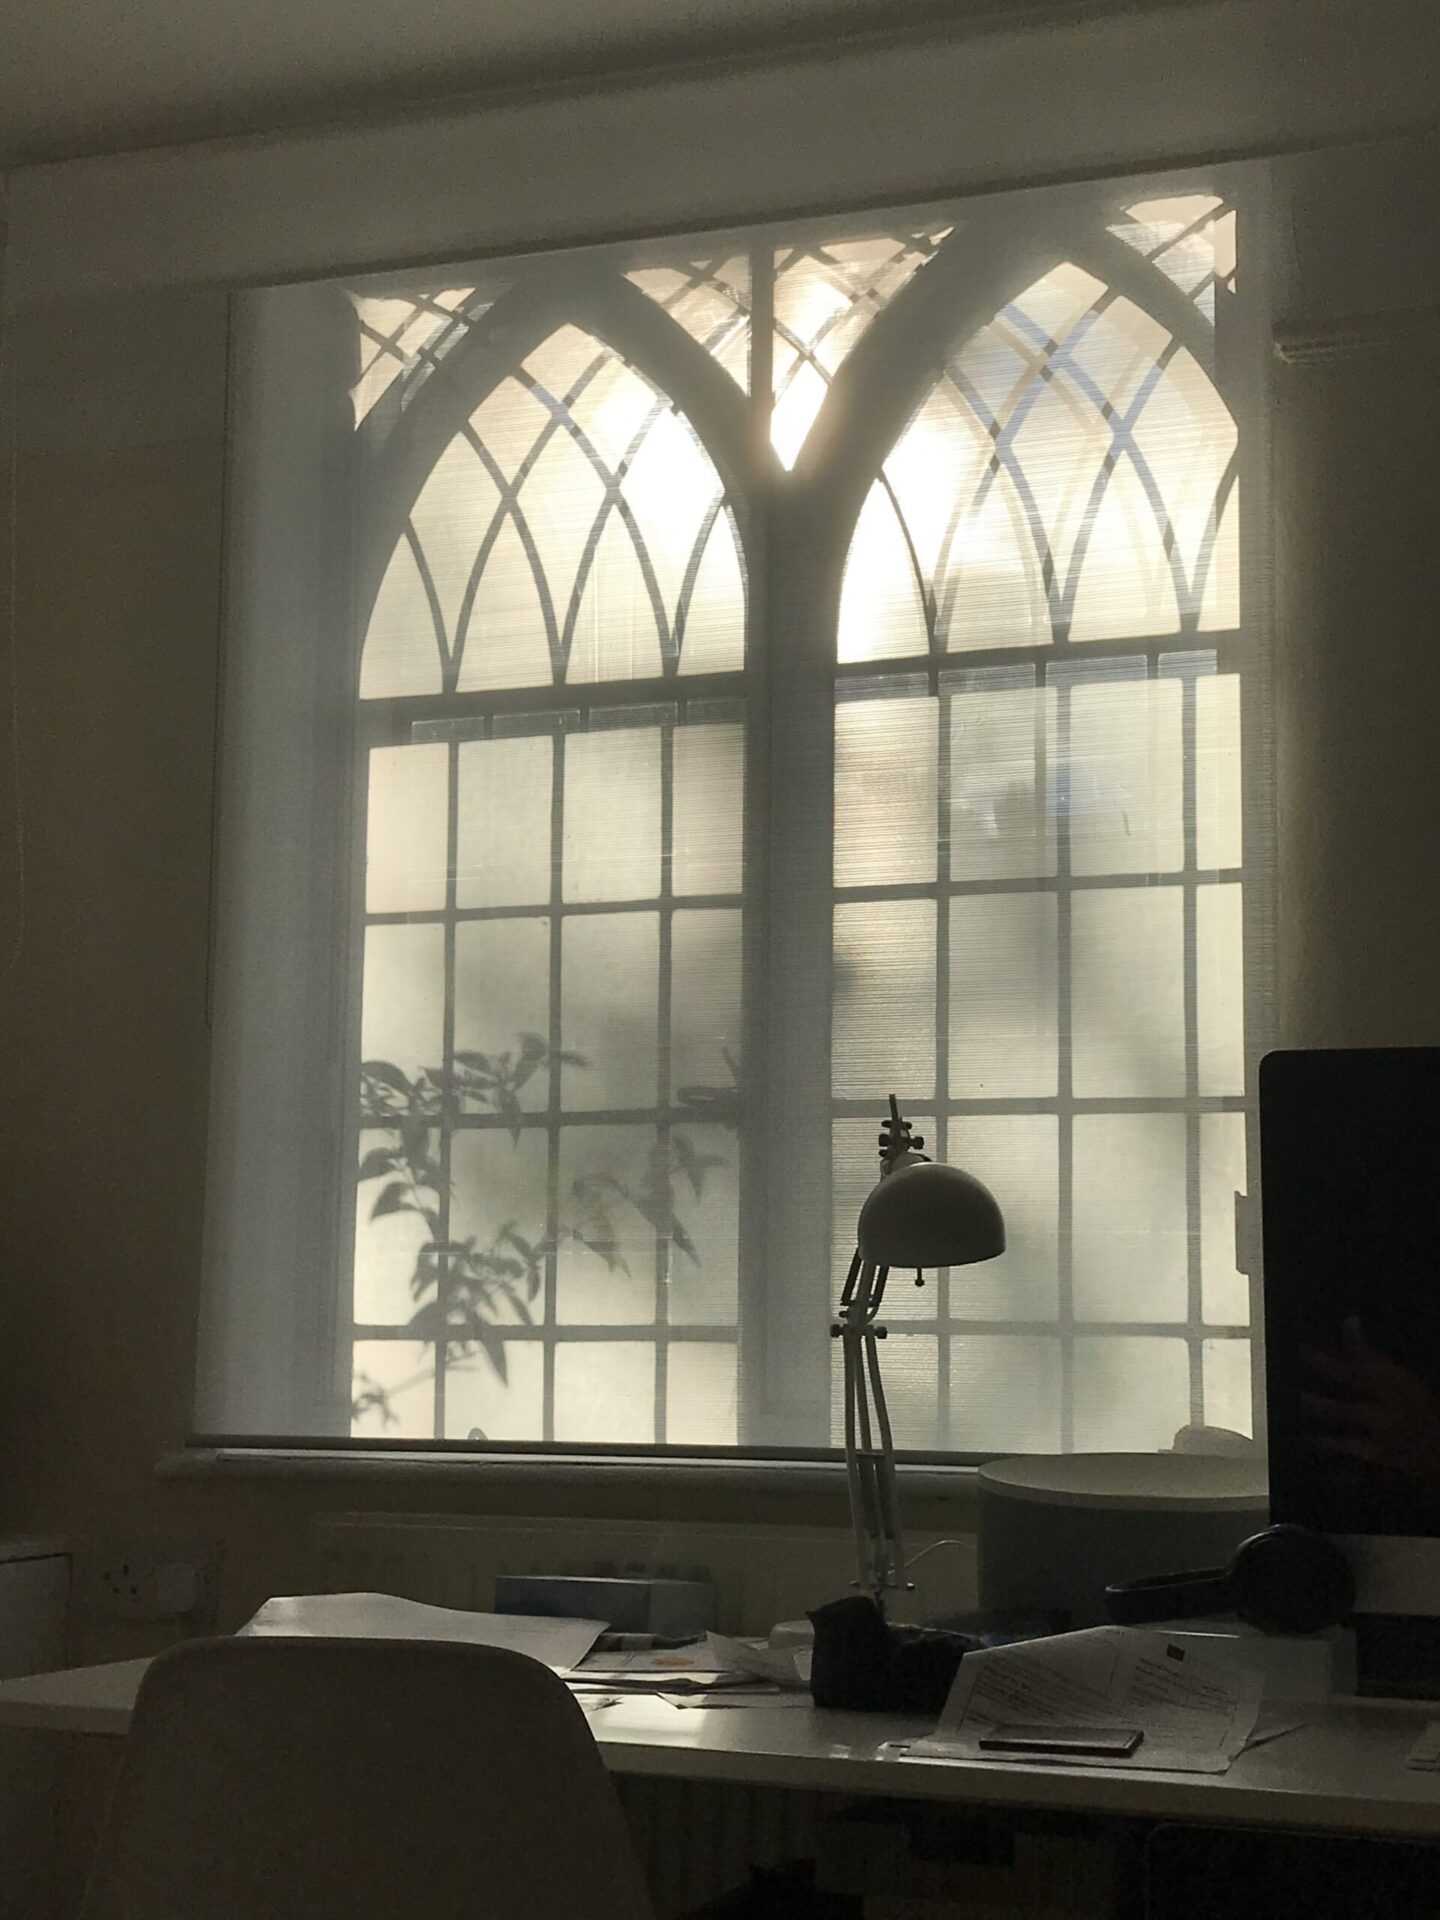 Inside of arched and crossed windows and light reflections